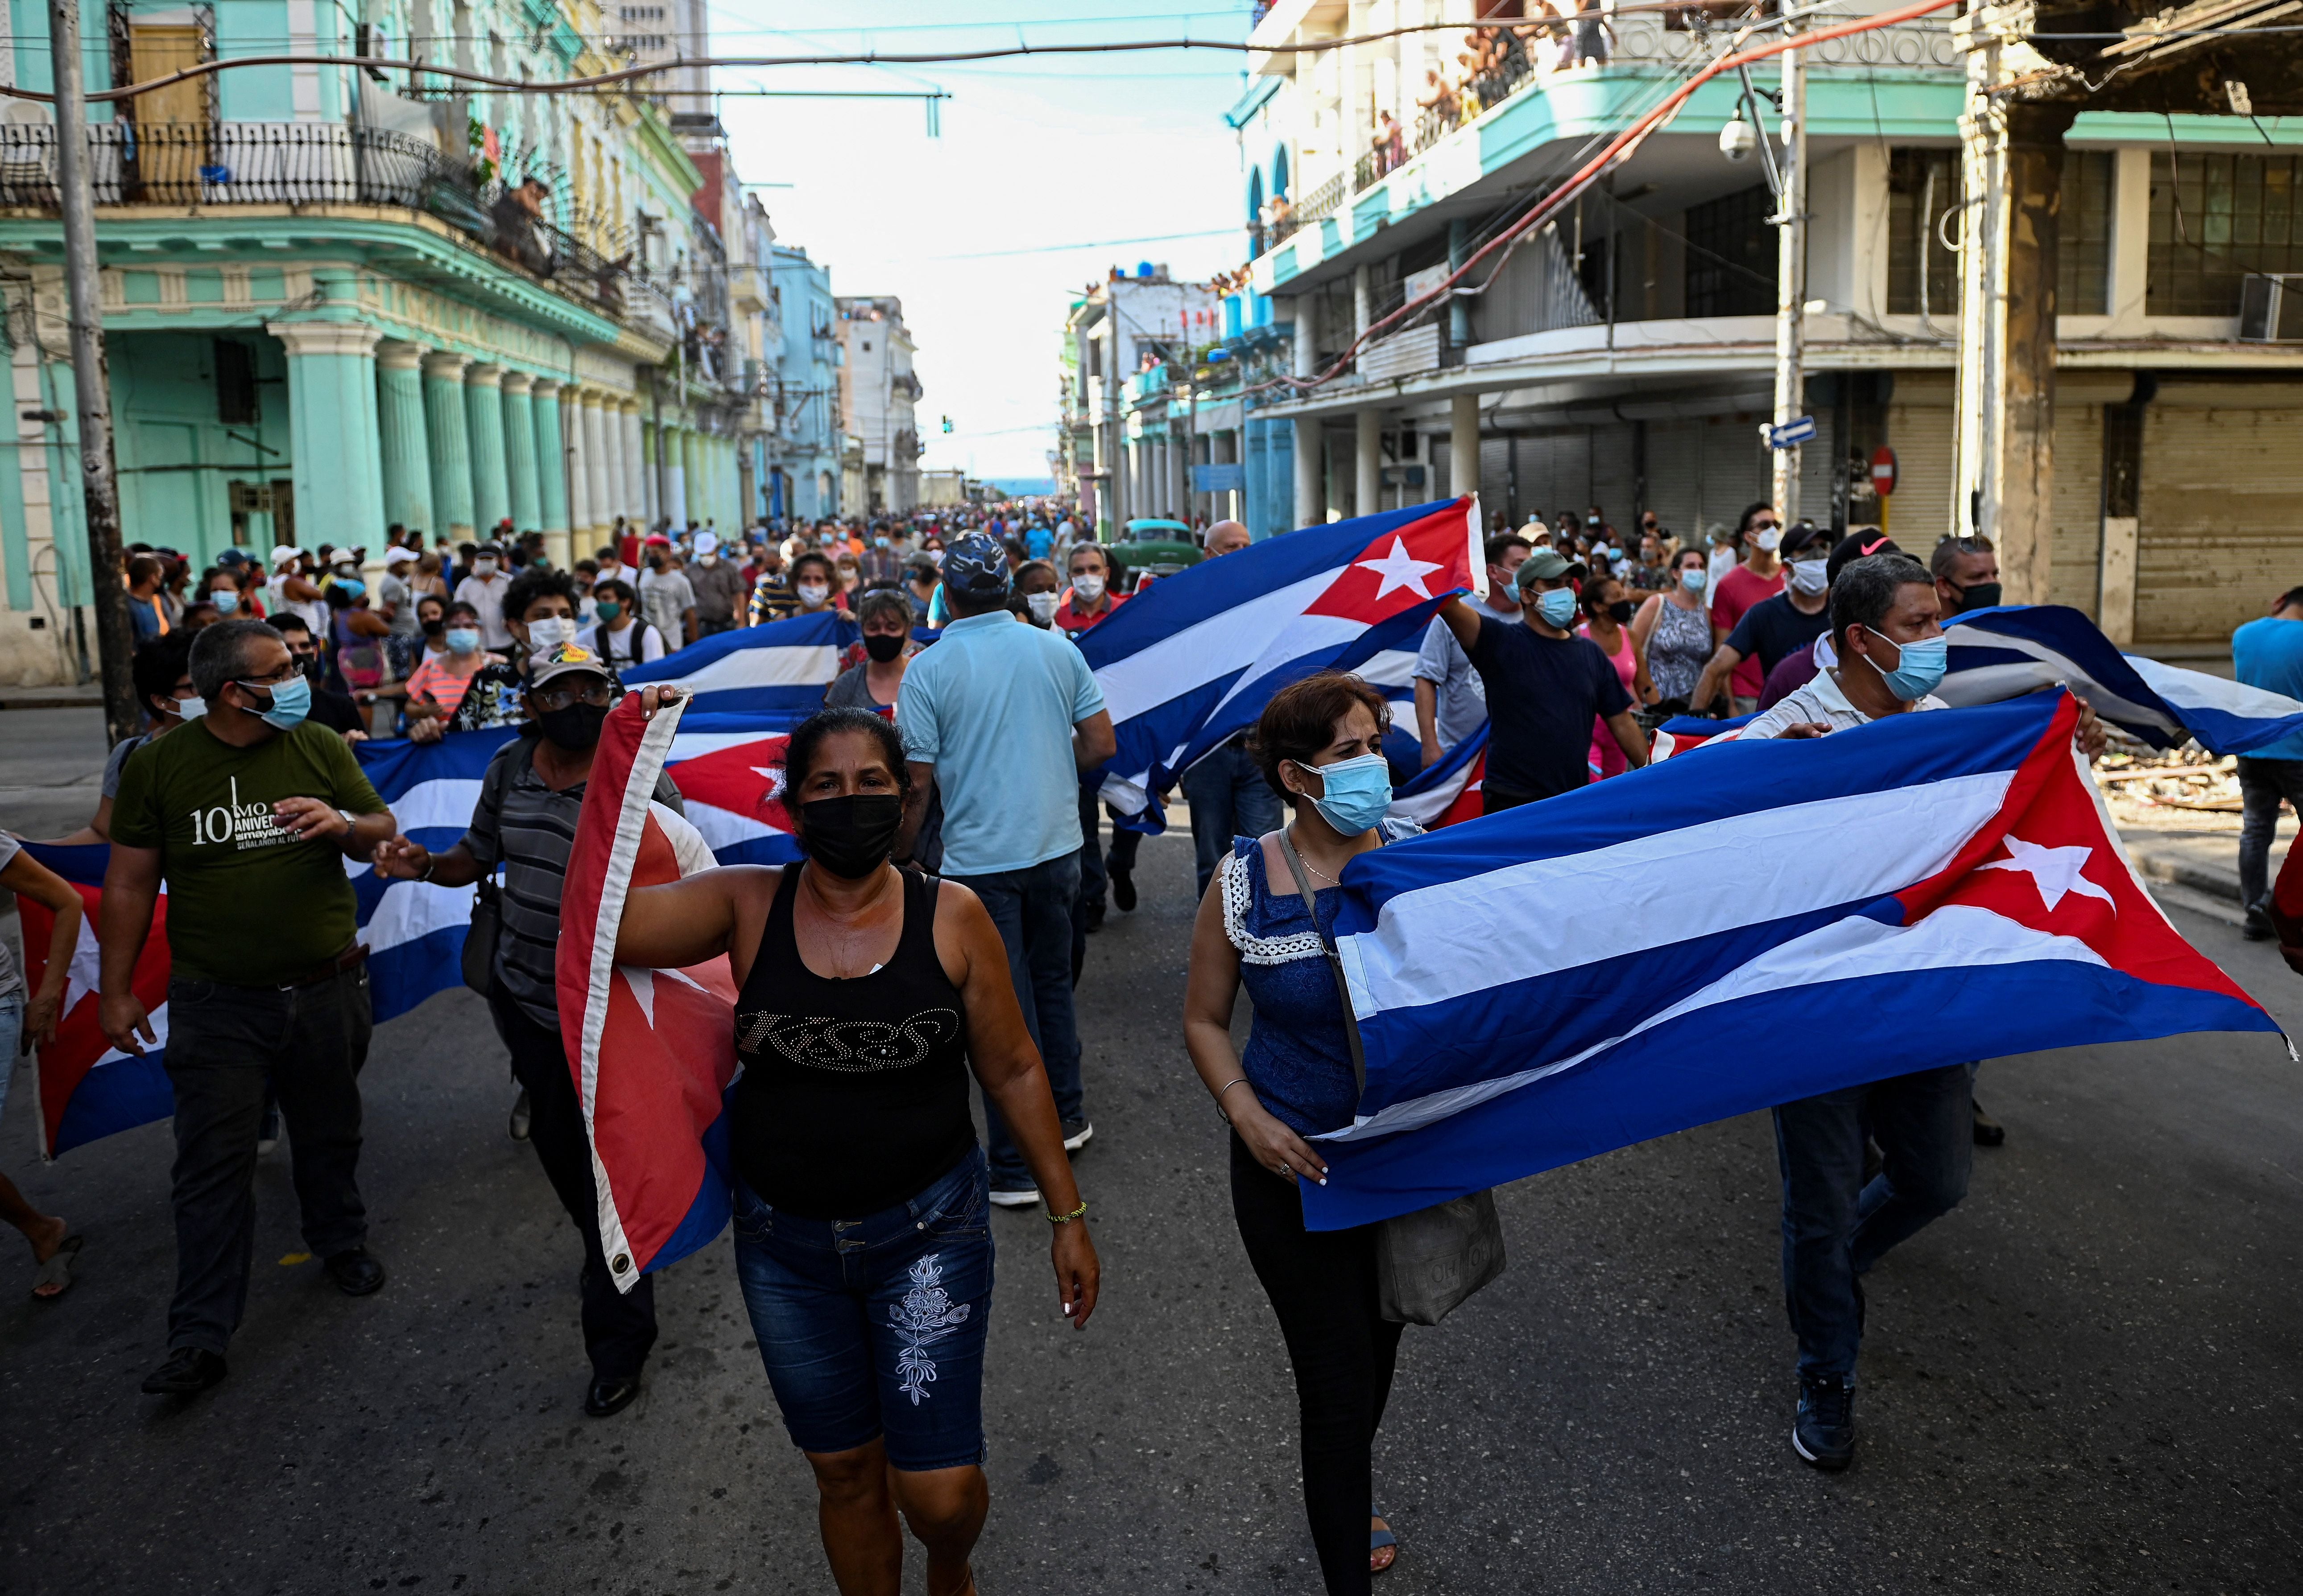 The protests took place in cities across Cuba on Sunday